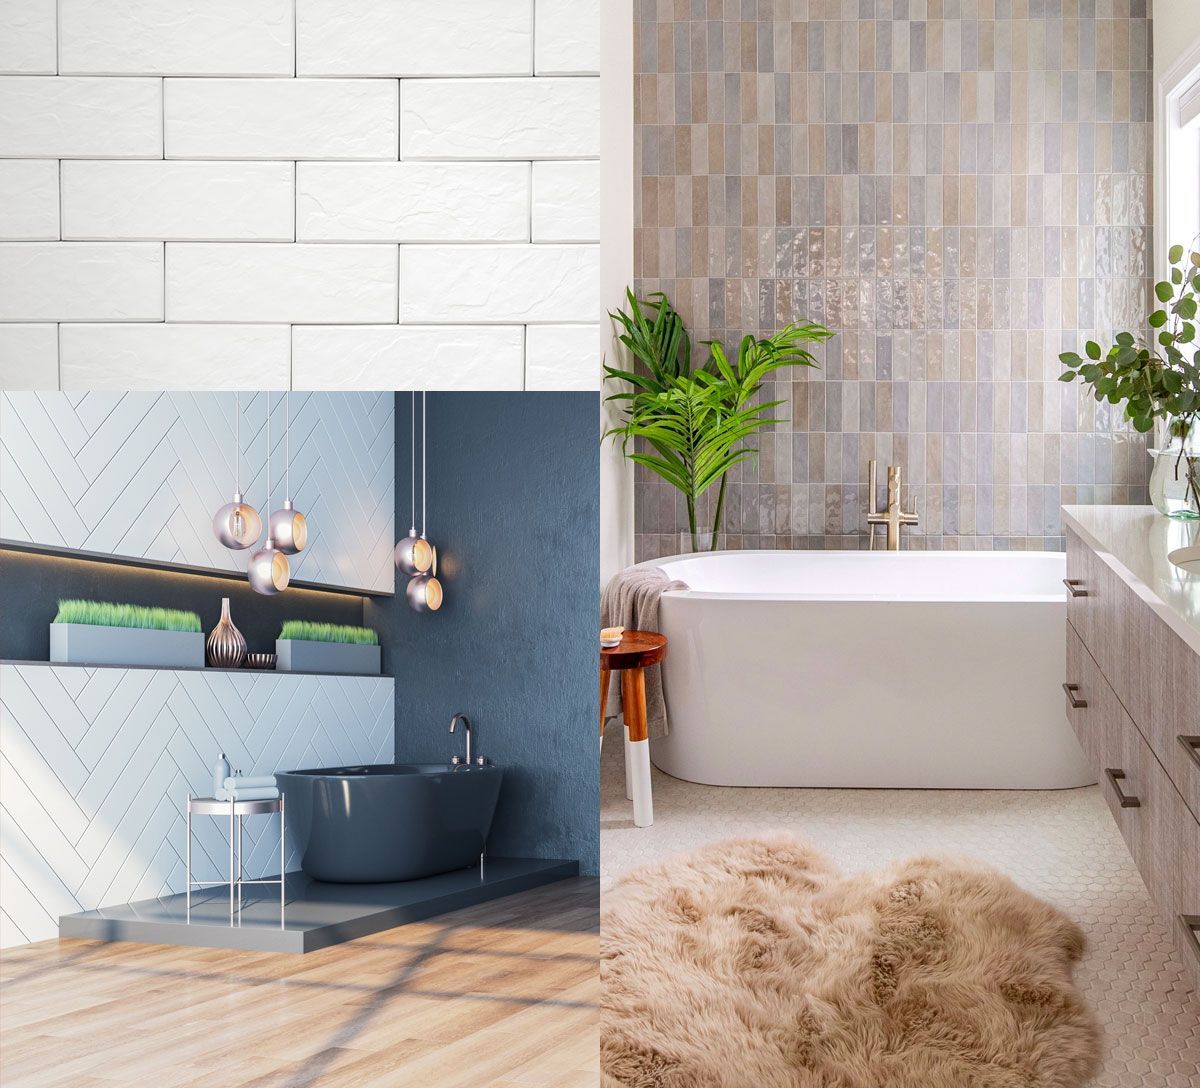 A collage of different textured bathroom tiles